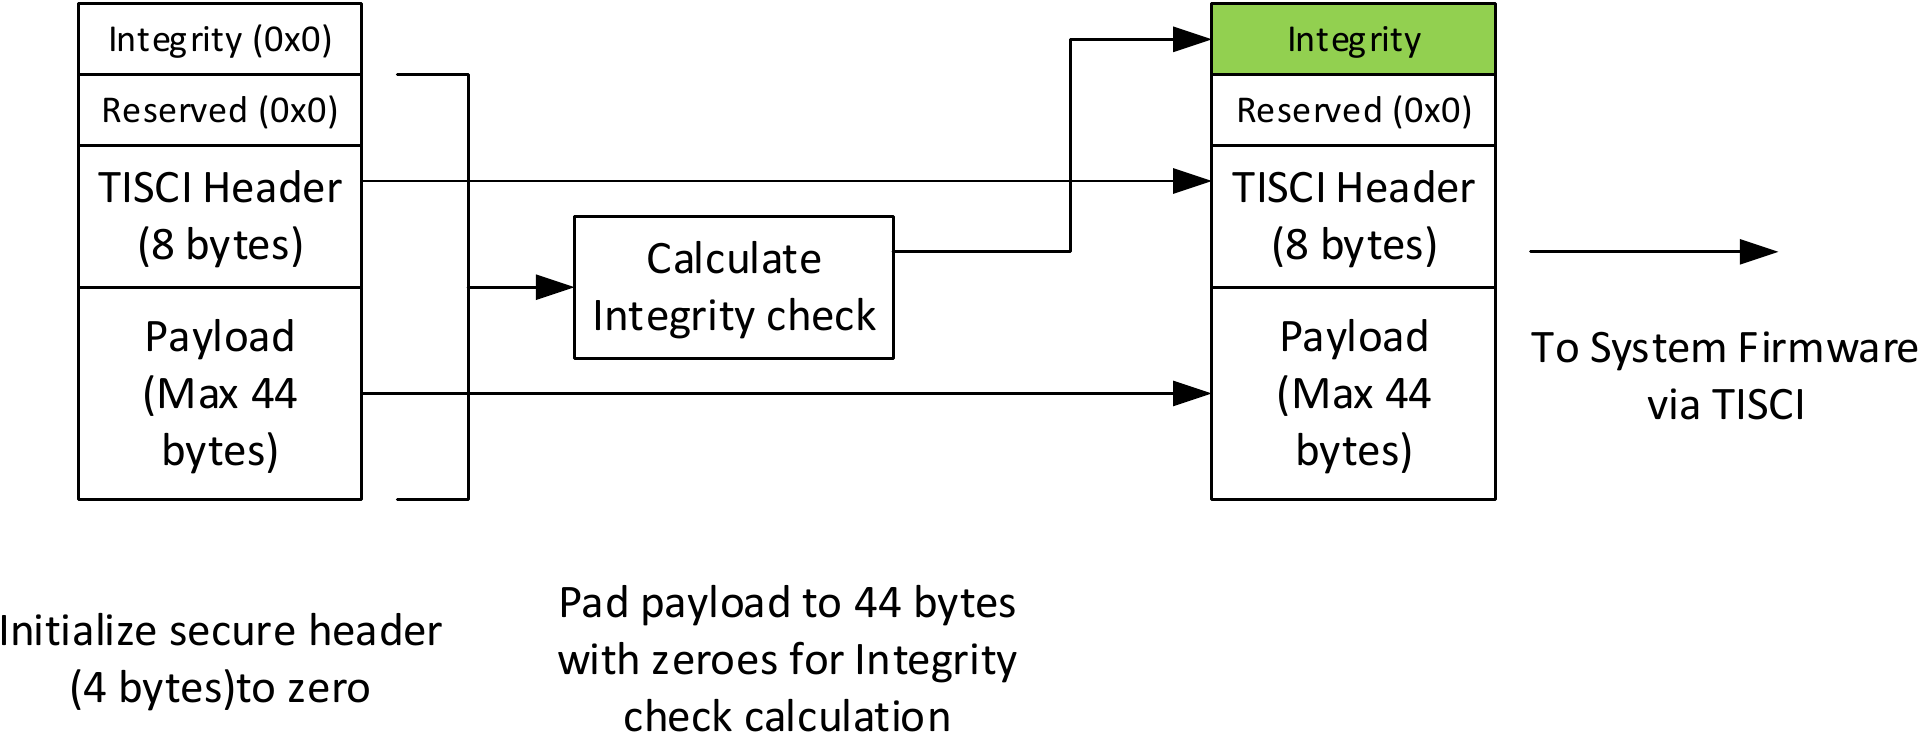 ../_images/user-integrity-check-calculation.png